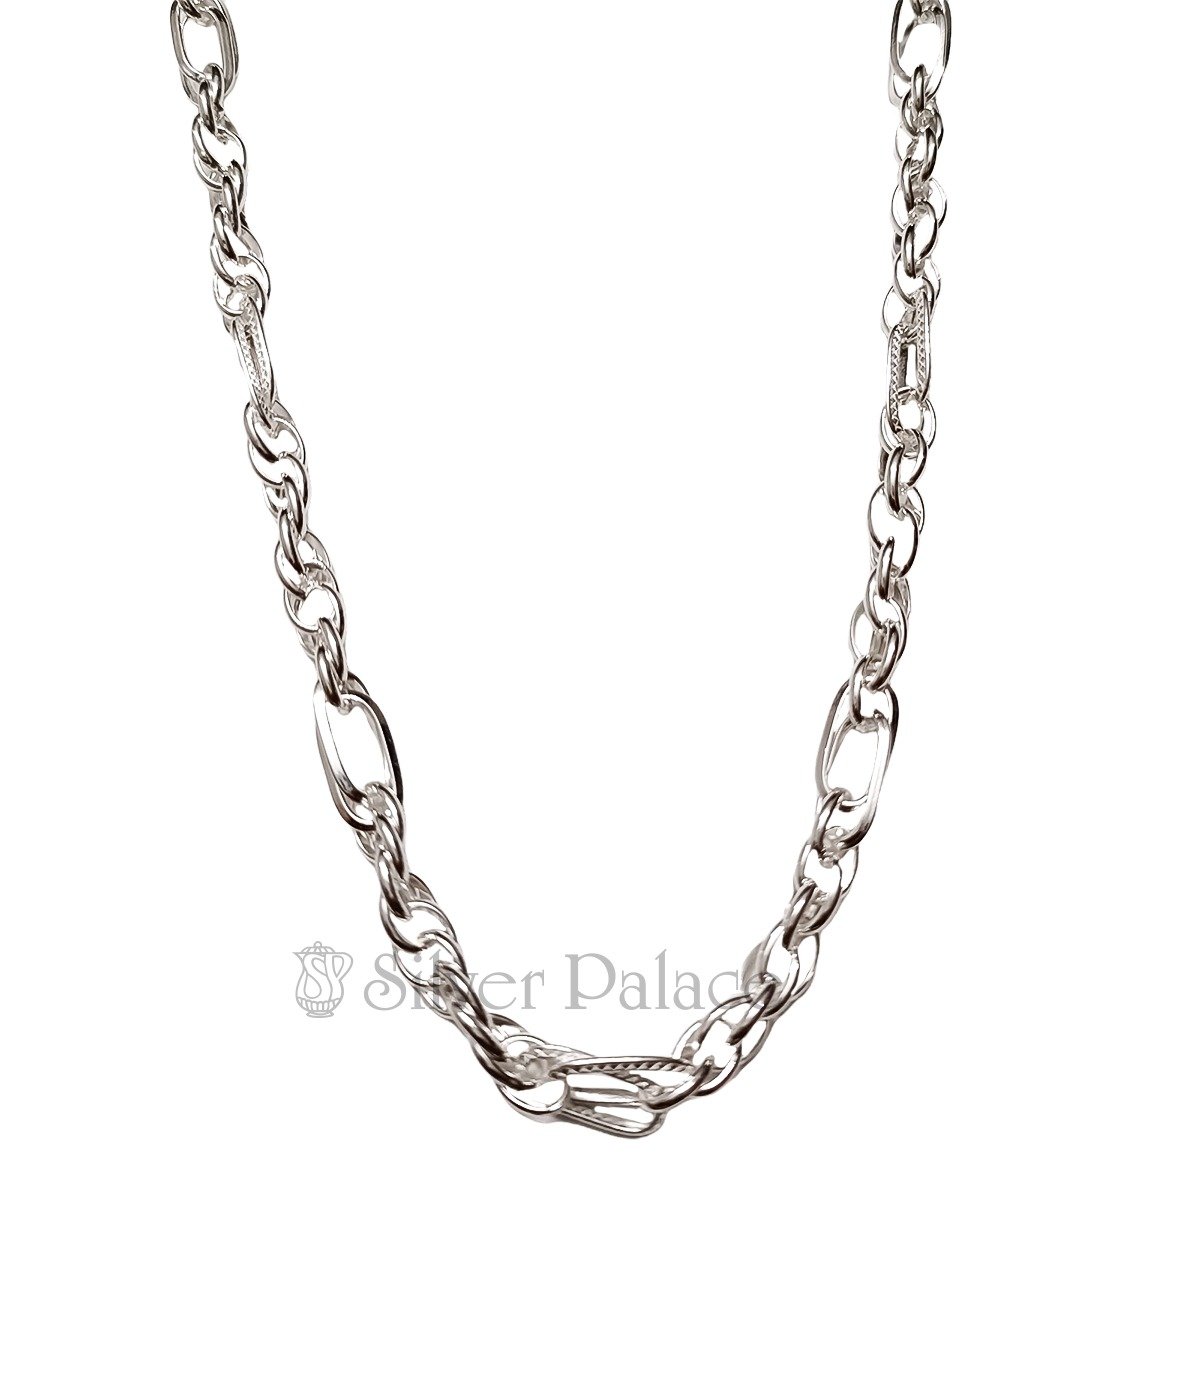 STERLING SILVER CHUNKY LINKED CHAIN